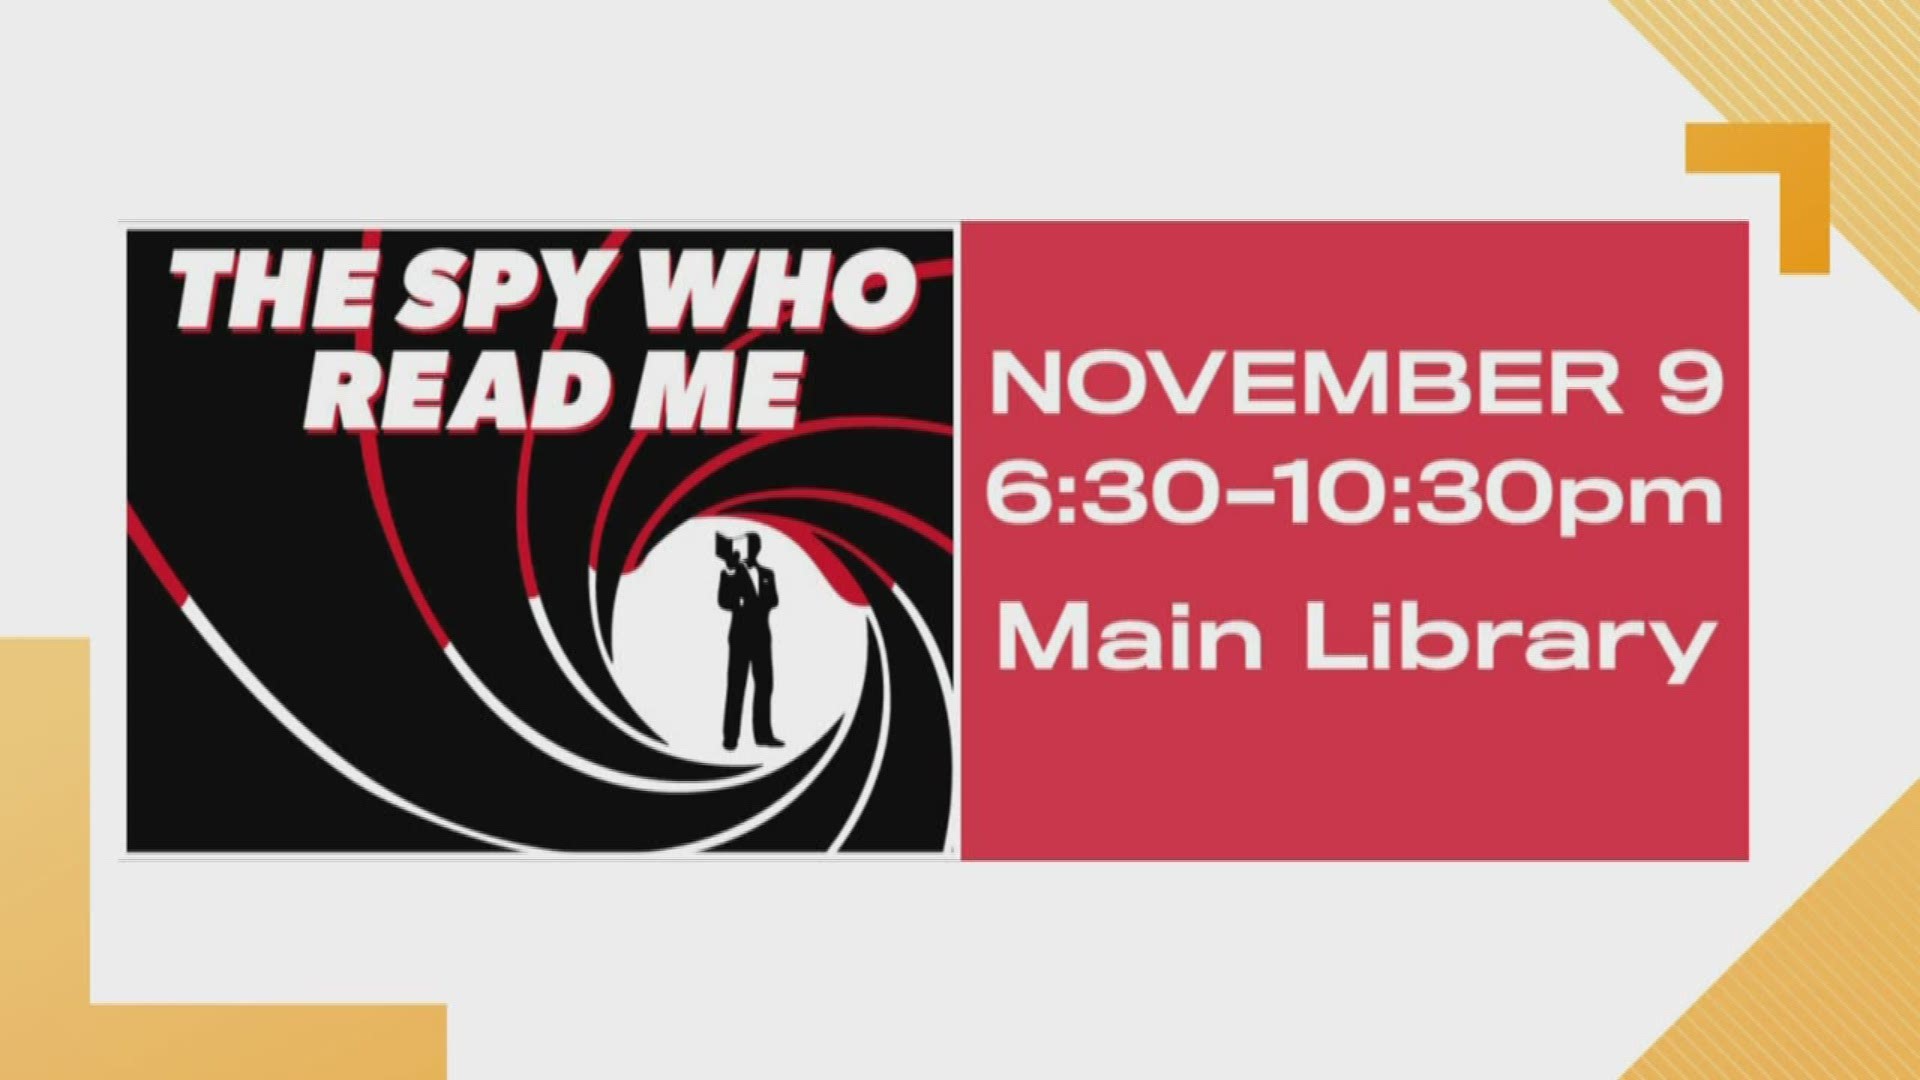 NOLA Public Library is getting children and adults back into with a 007 themed fundraiser